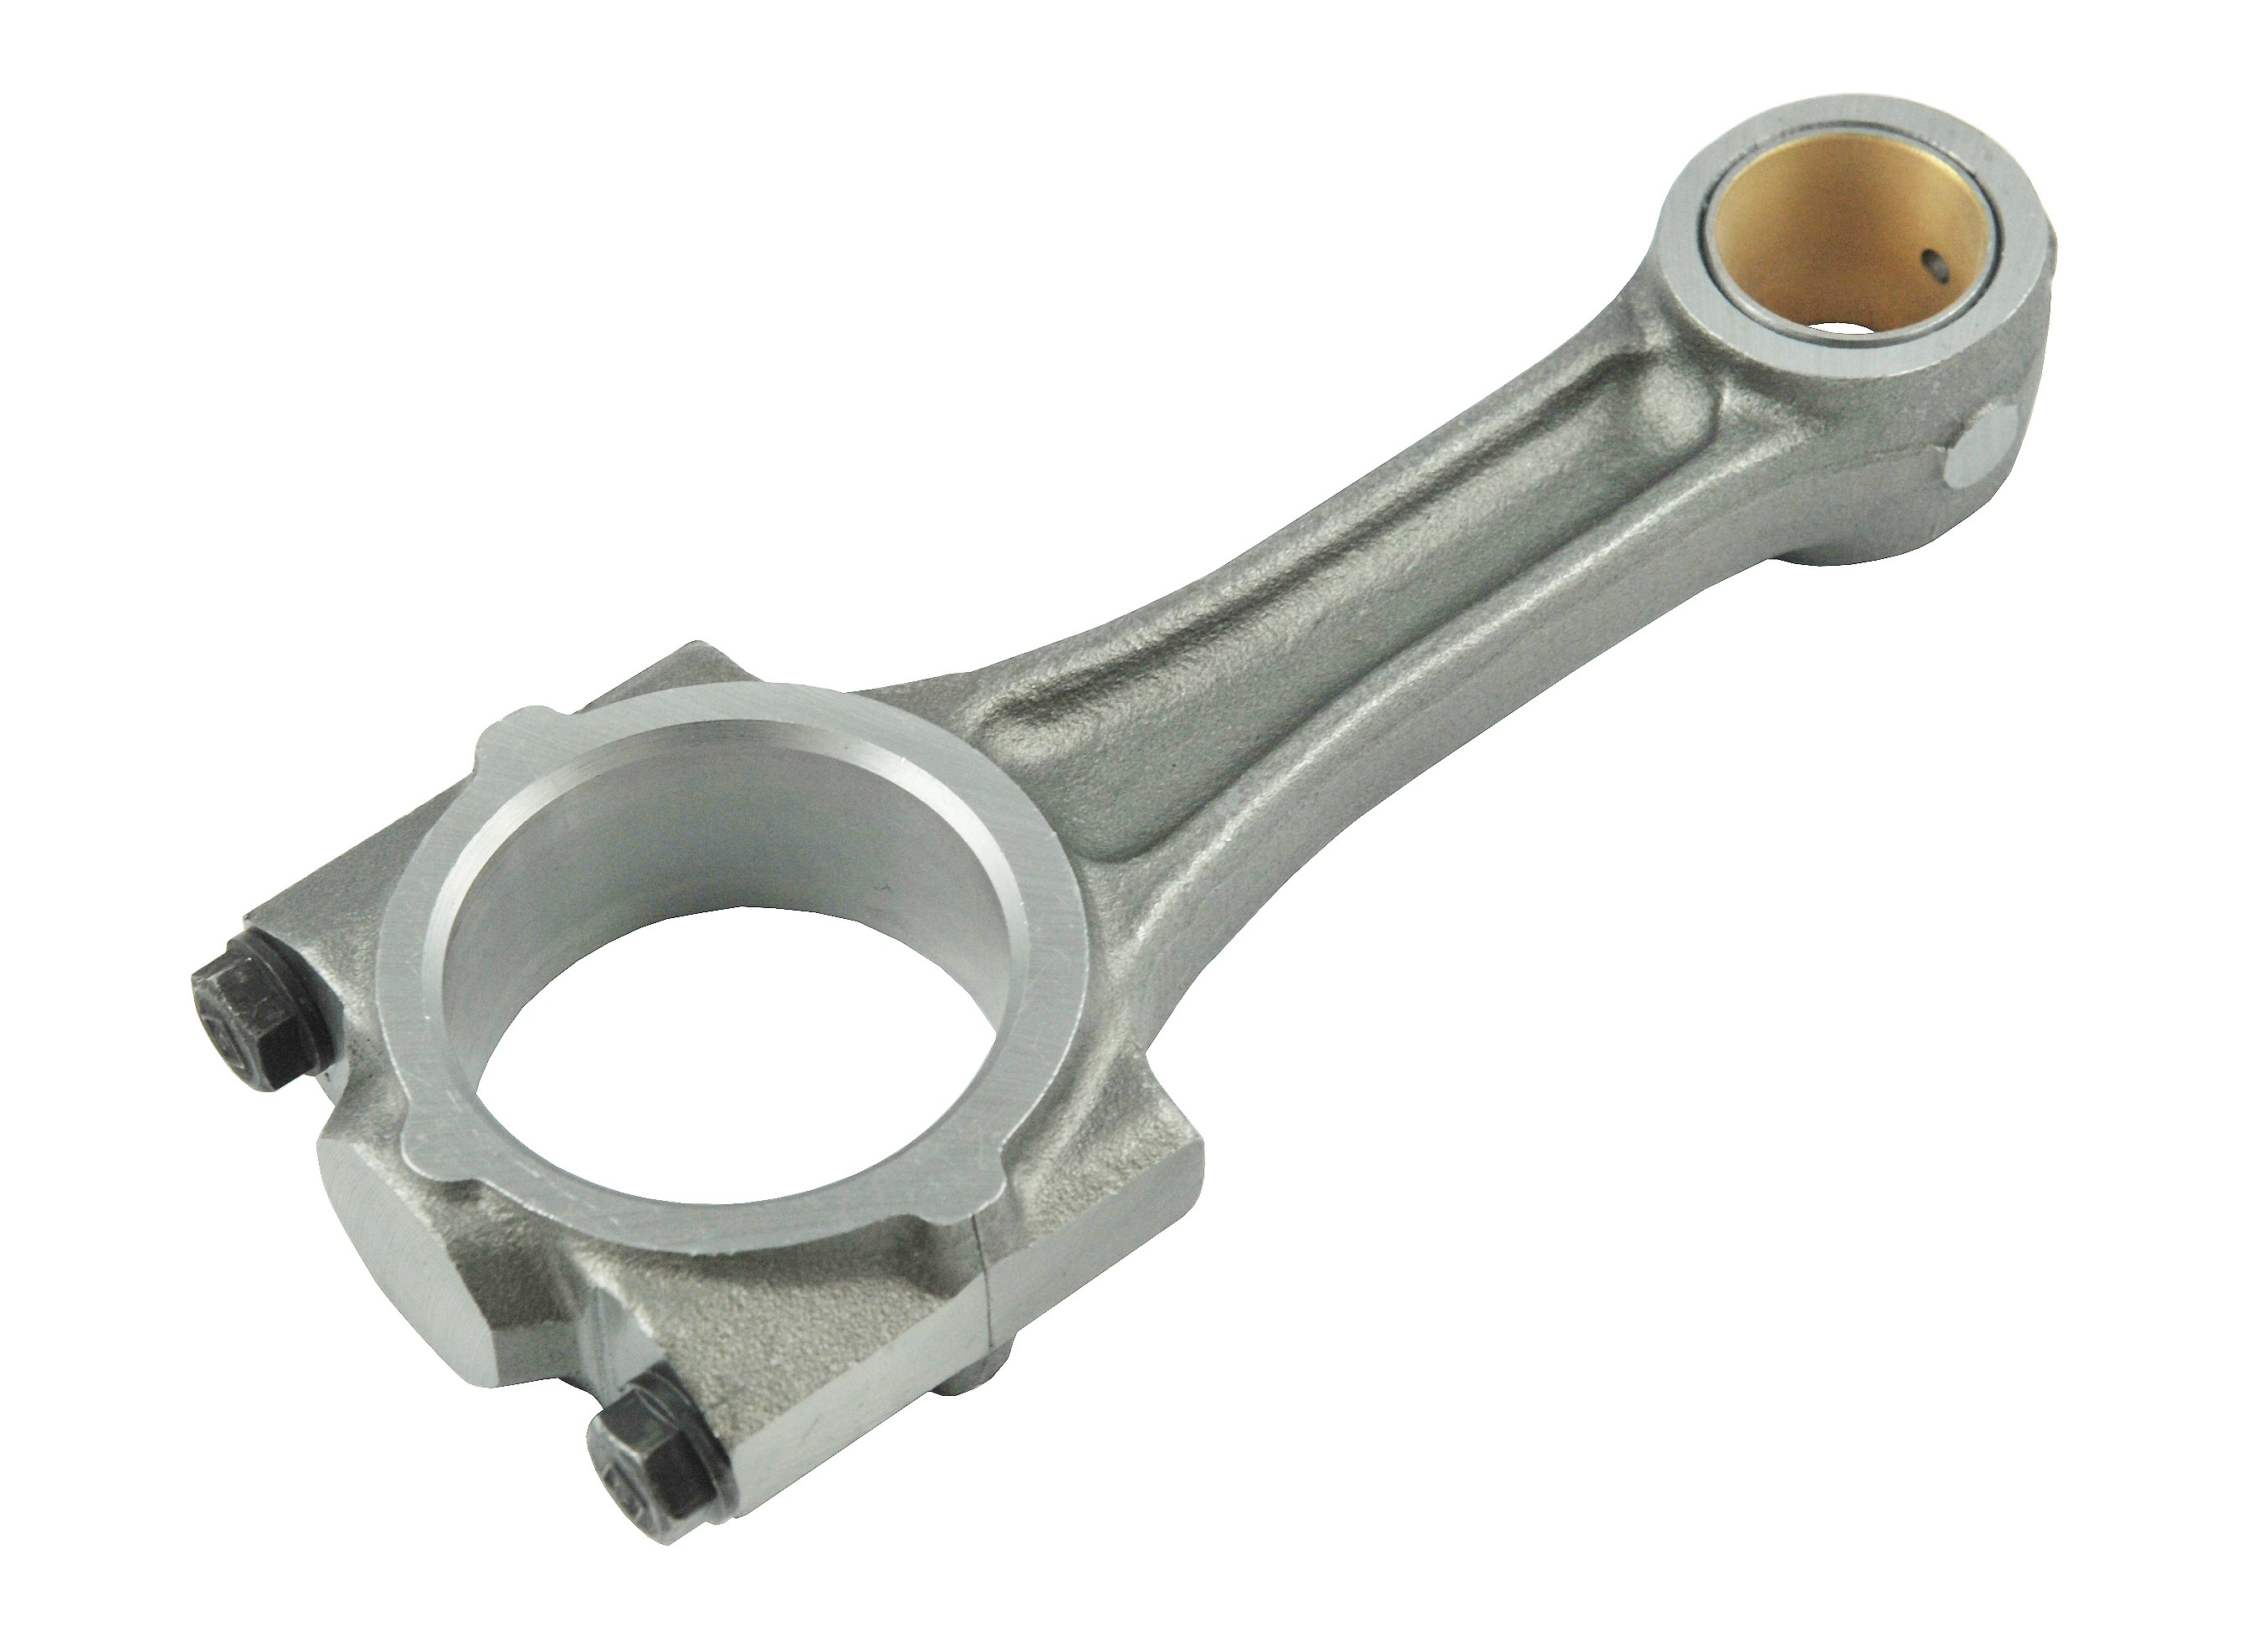 1 Piece Connecting Rod 17311-22010 17331-22010 for Kubota V1702 DI Engine 